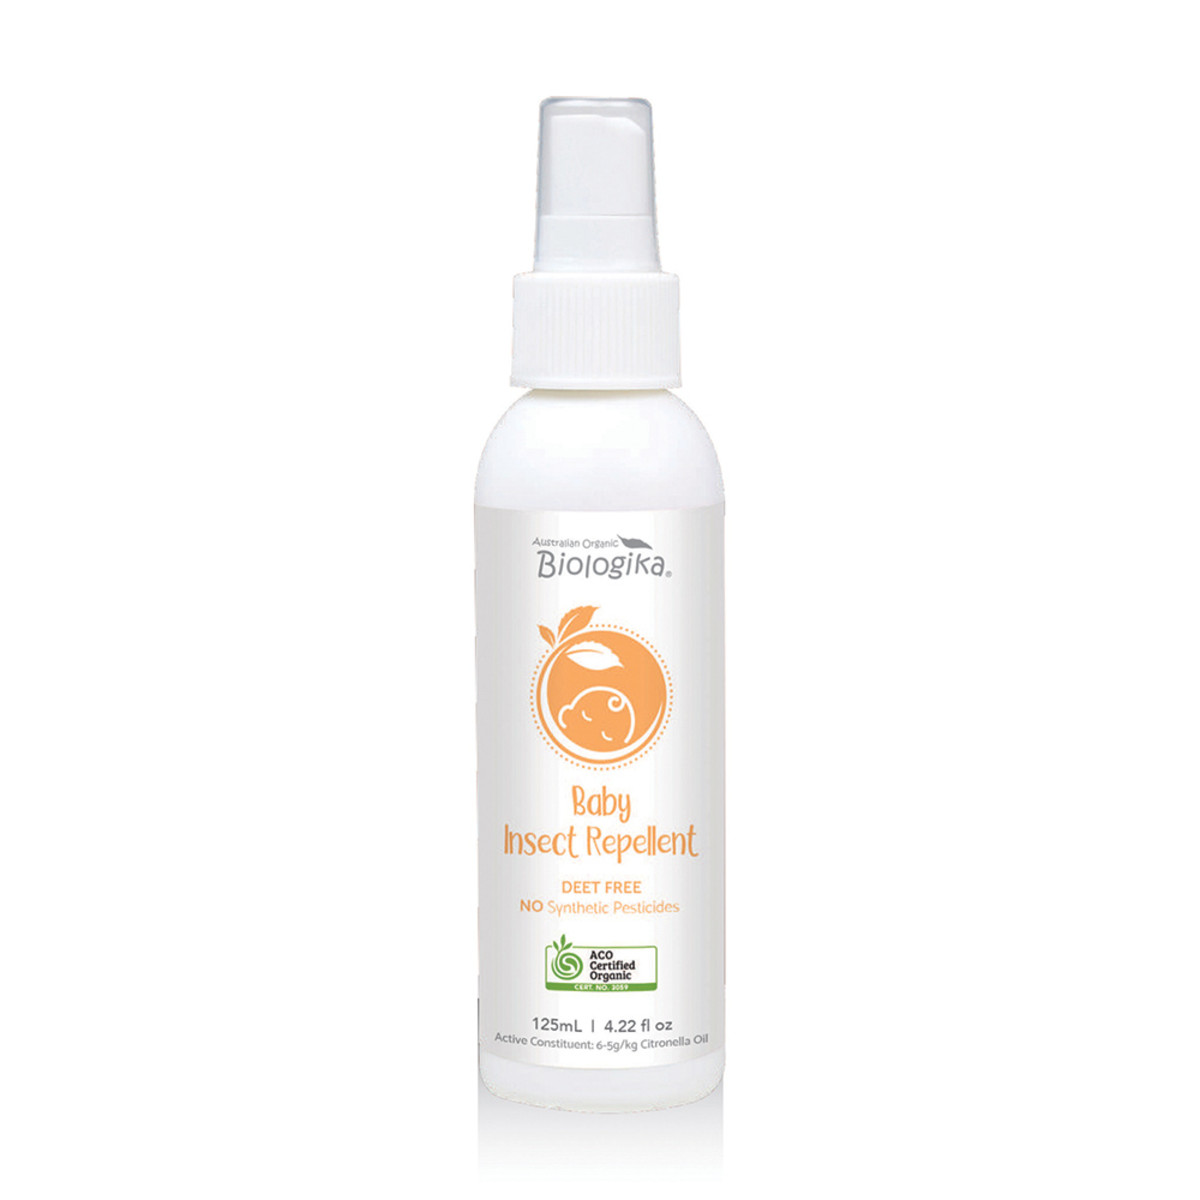 Biologika Baby Insect Repellent